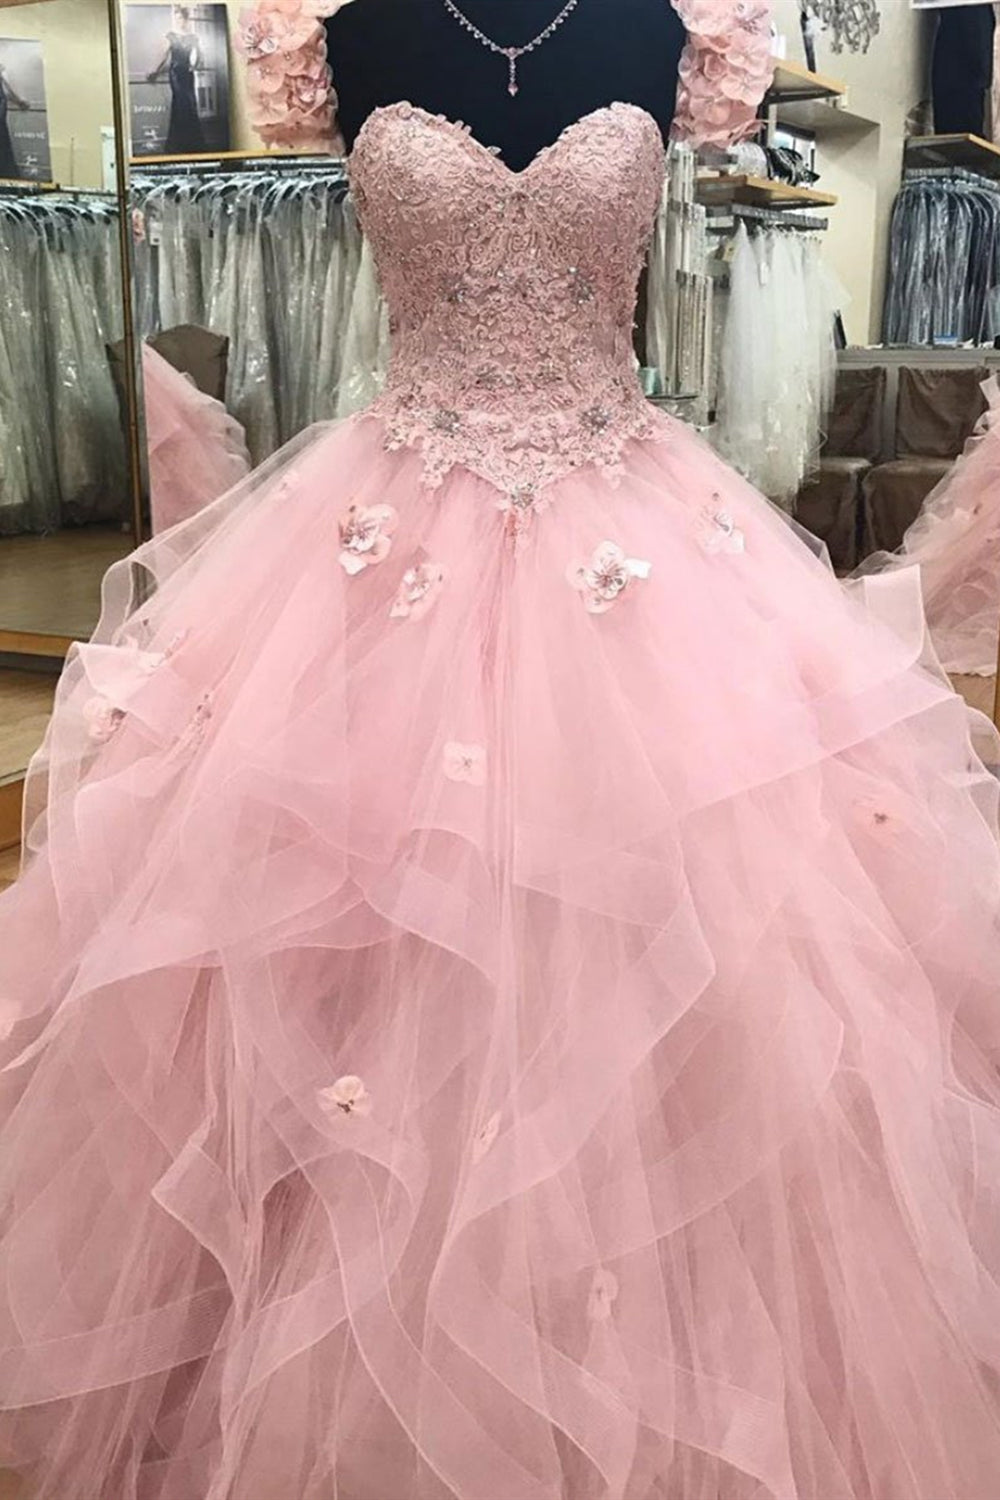 Gorgeous Strapless Pink Lace Fluffy Long Prom Dresses, Pink Lace Floral Formal Dresses, Pink Evening Dresses